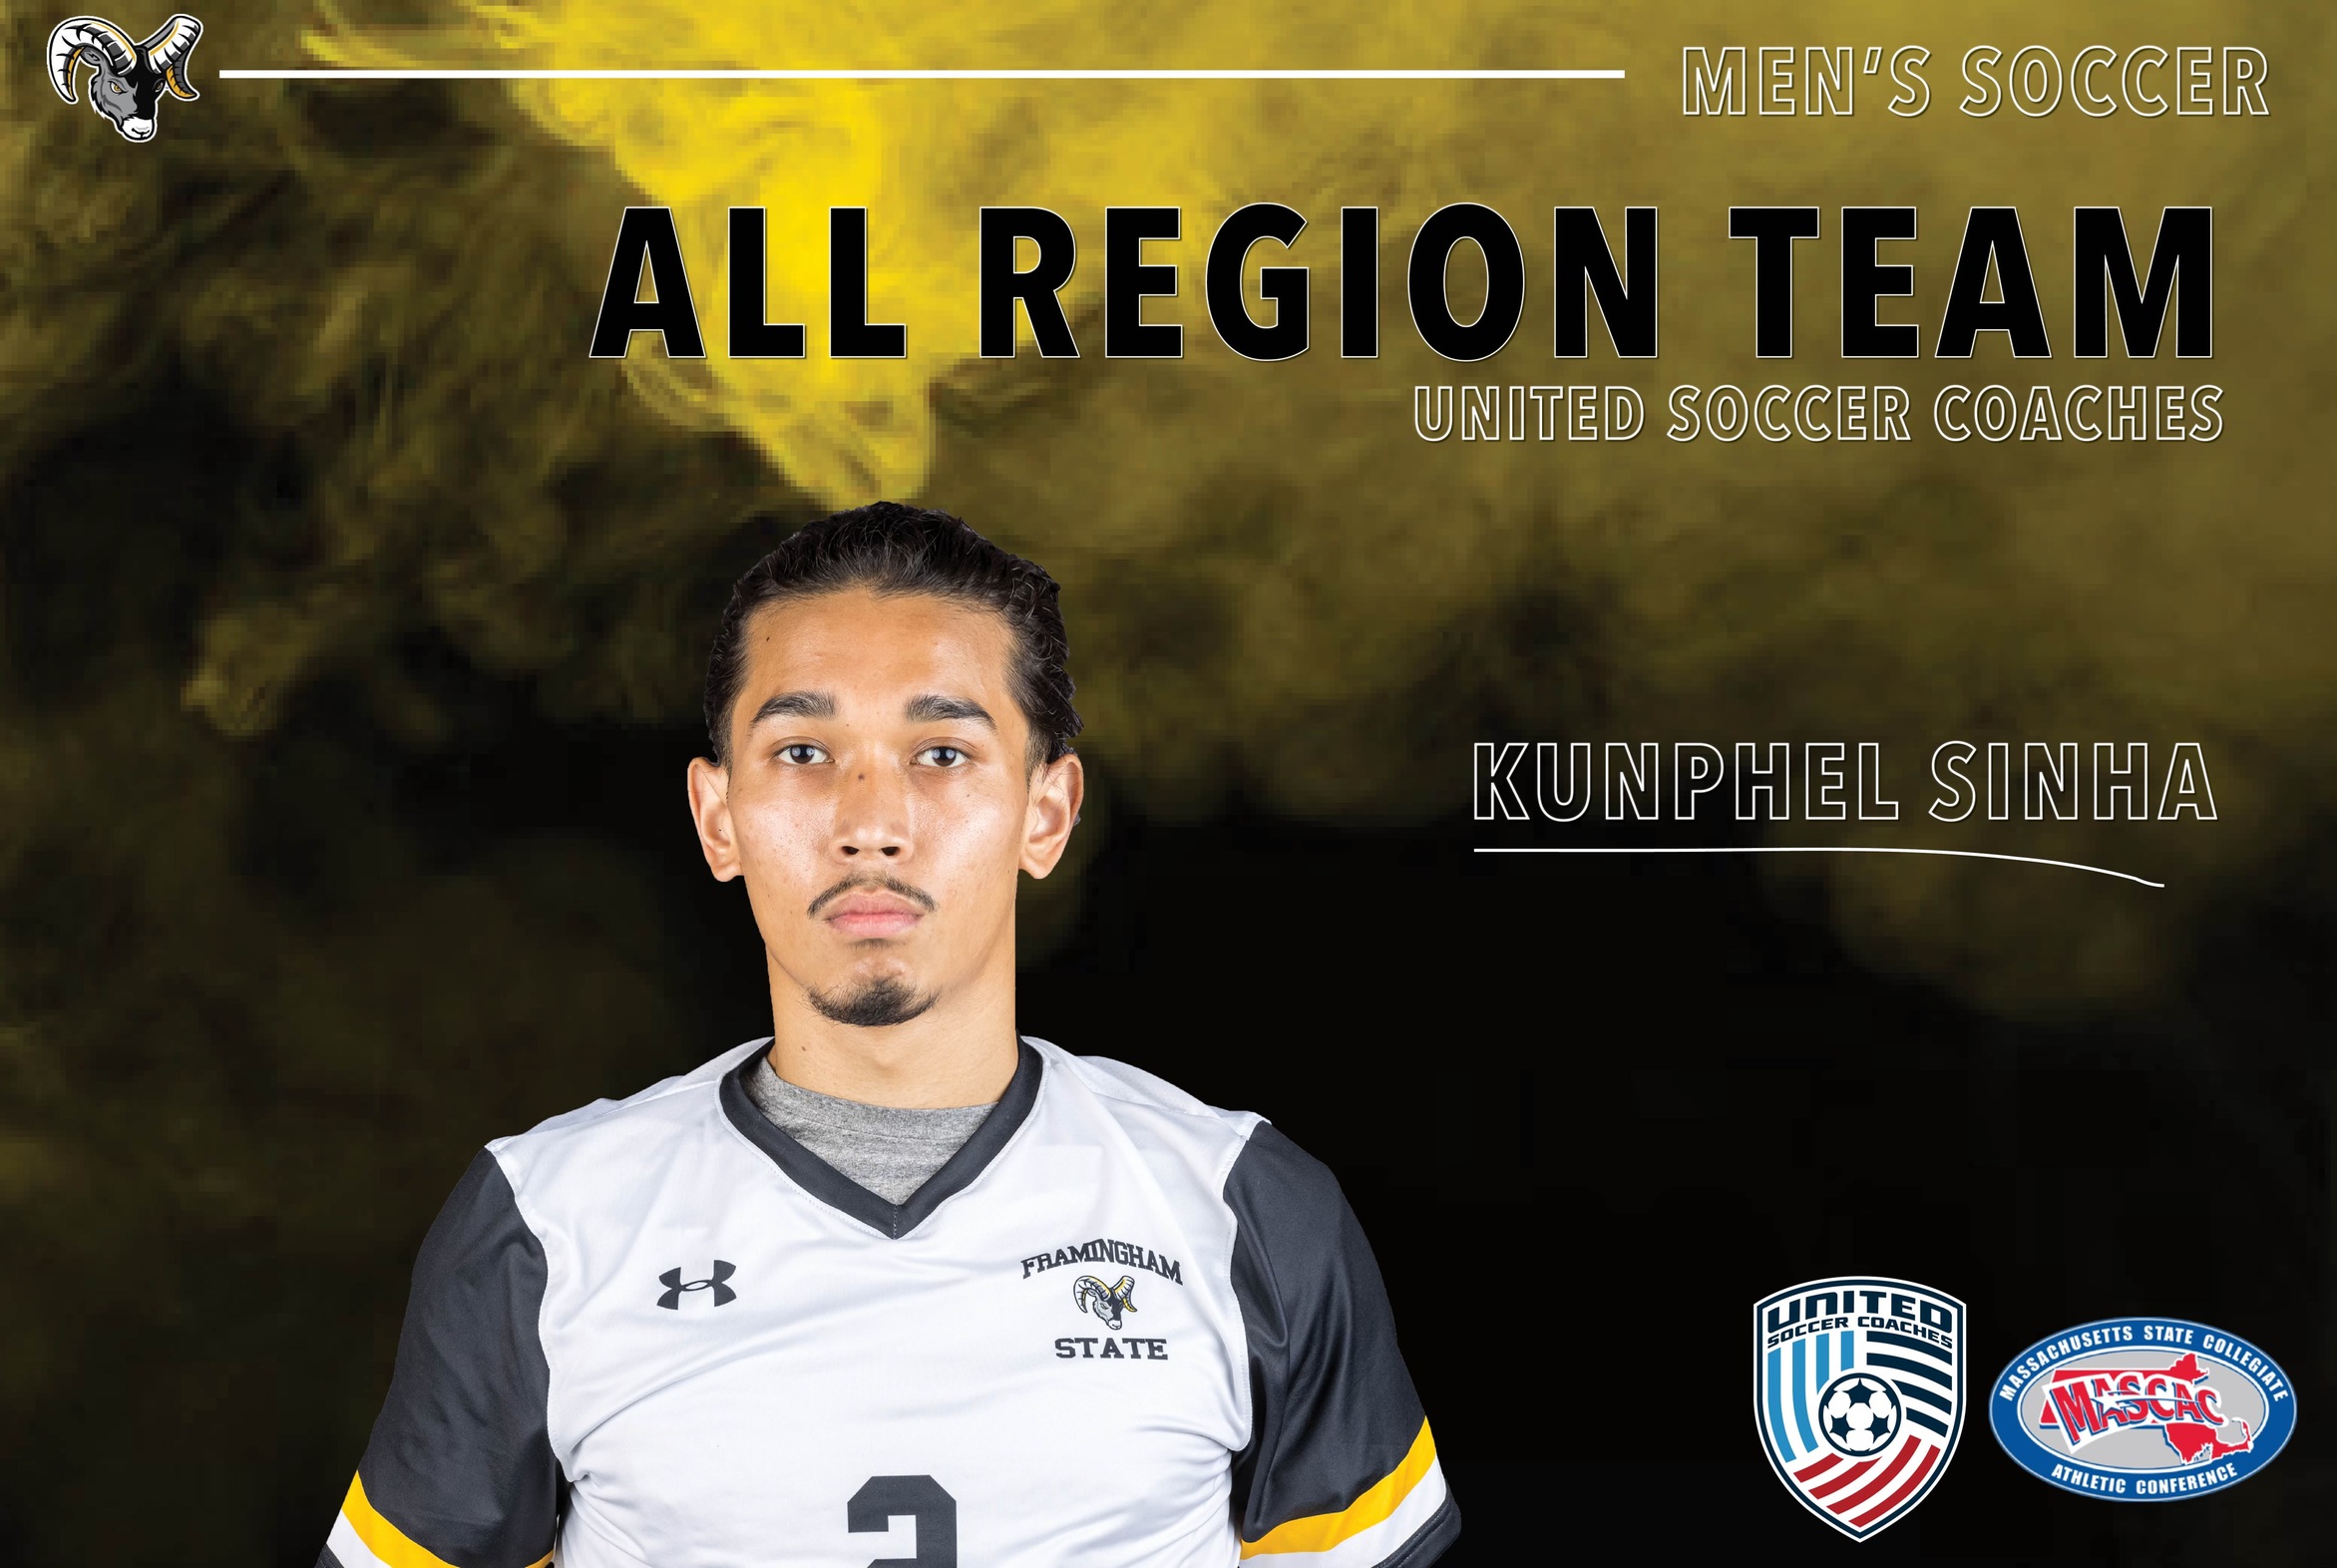 Sinha Named to United Soccer Coaches All-Region Team